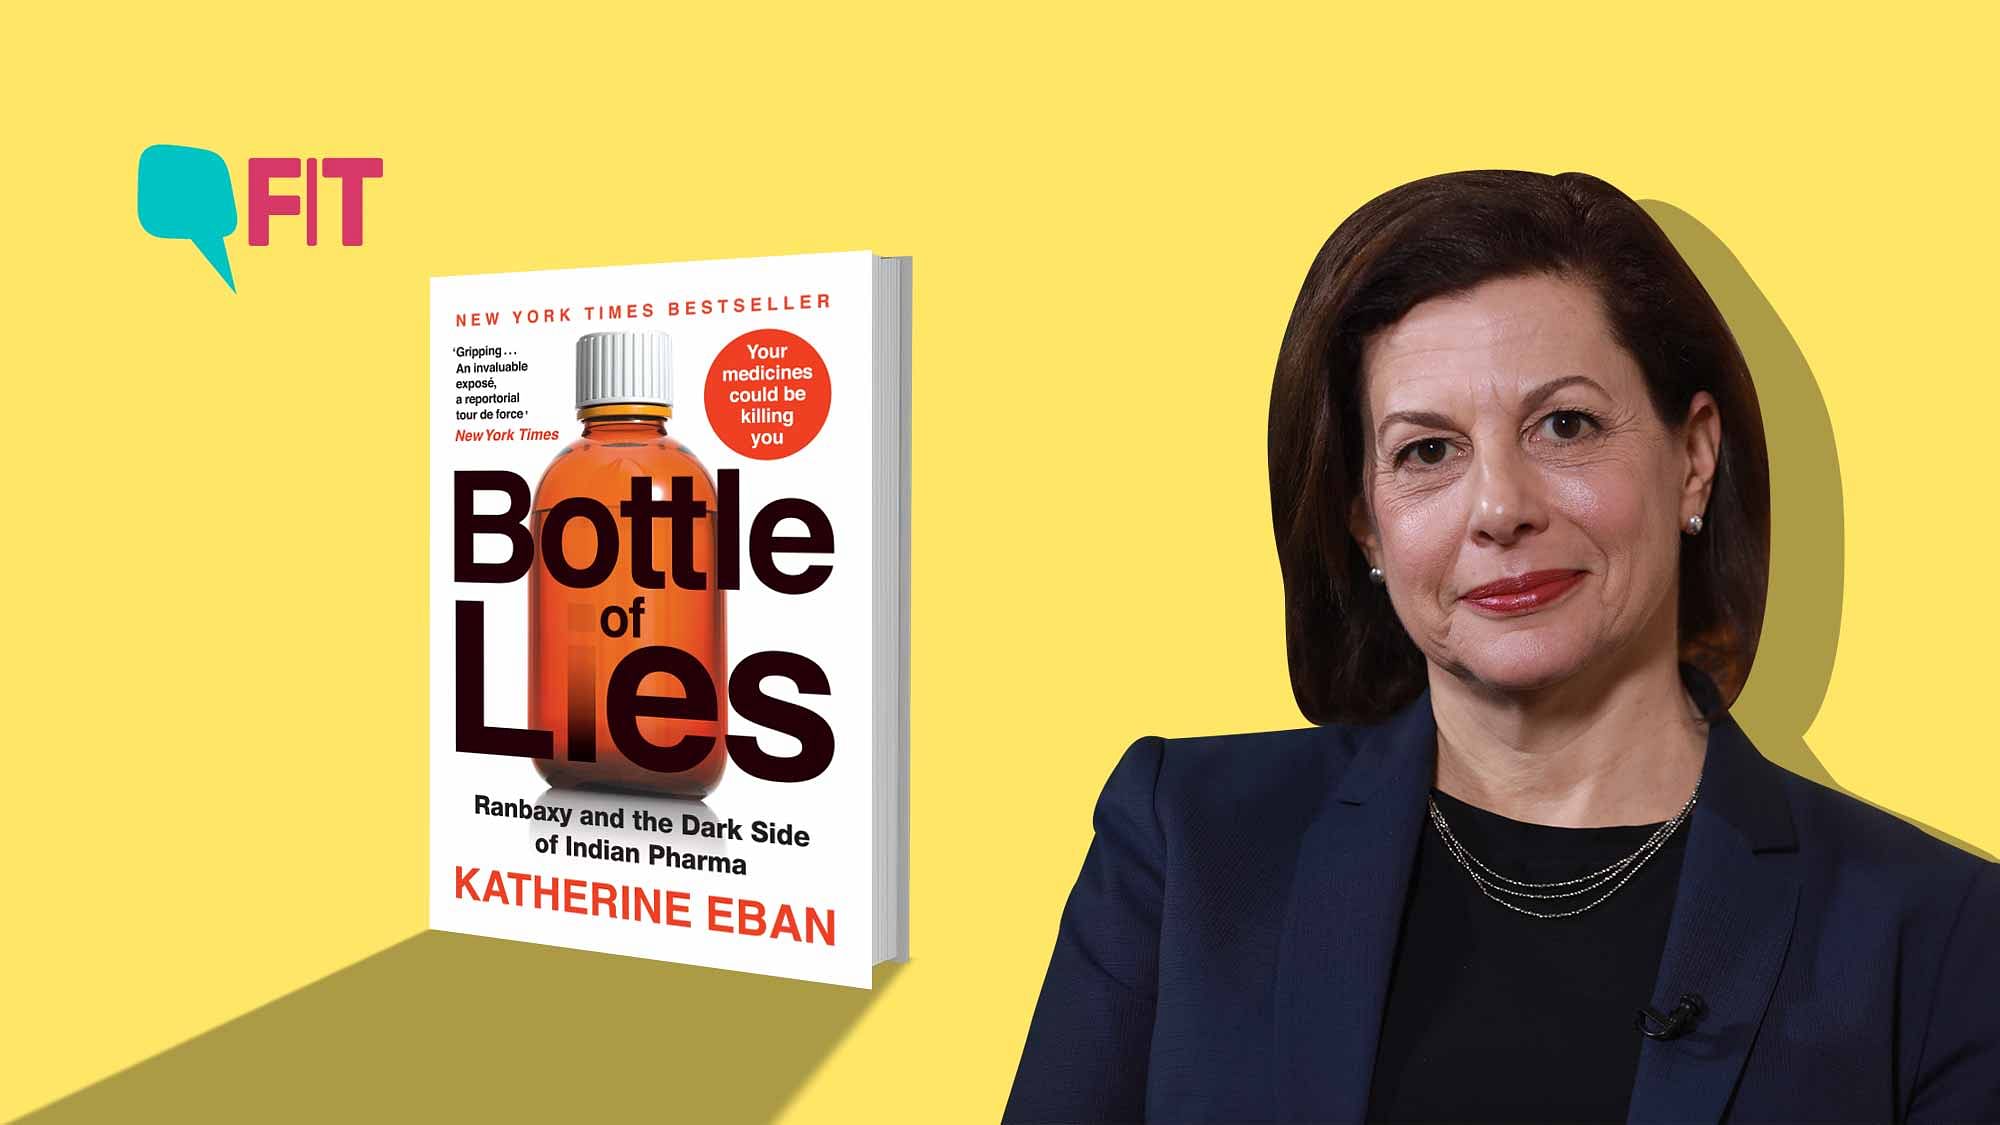 The book ‘Bottle of Lies’ traces the journey of generic drugs and exposes how some drug makers are gaming the system.